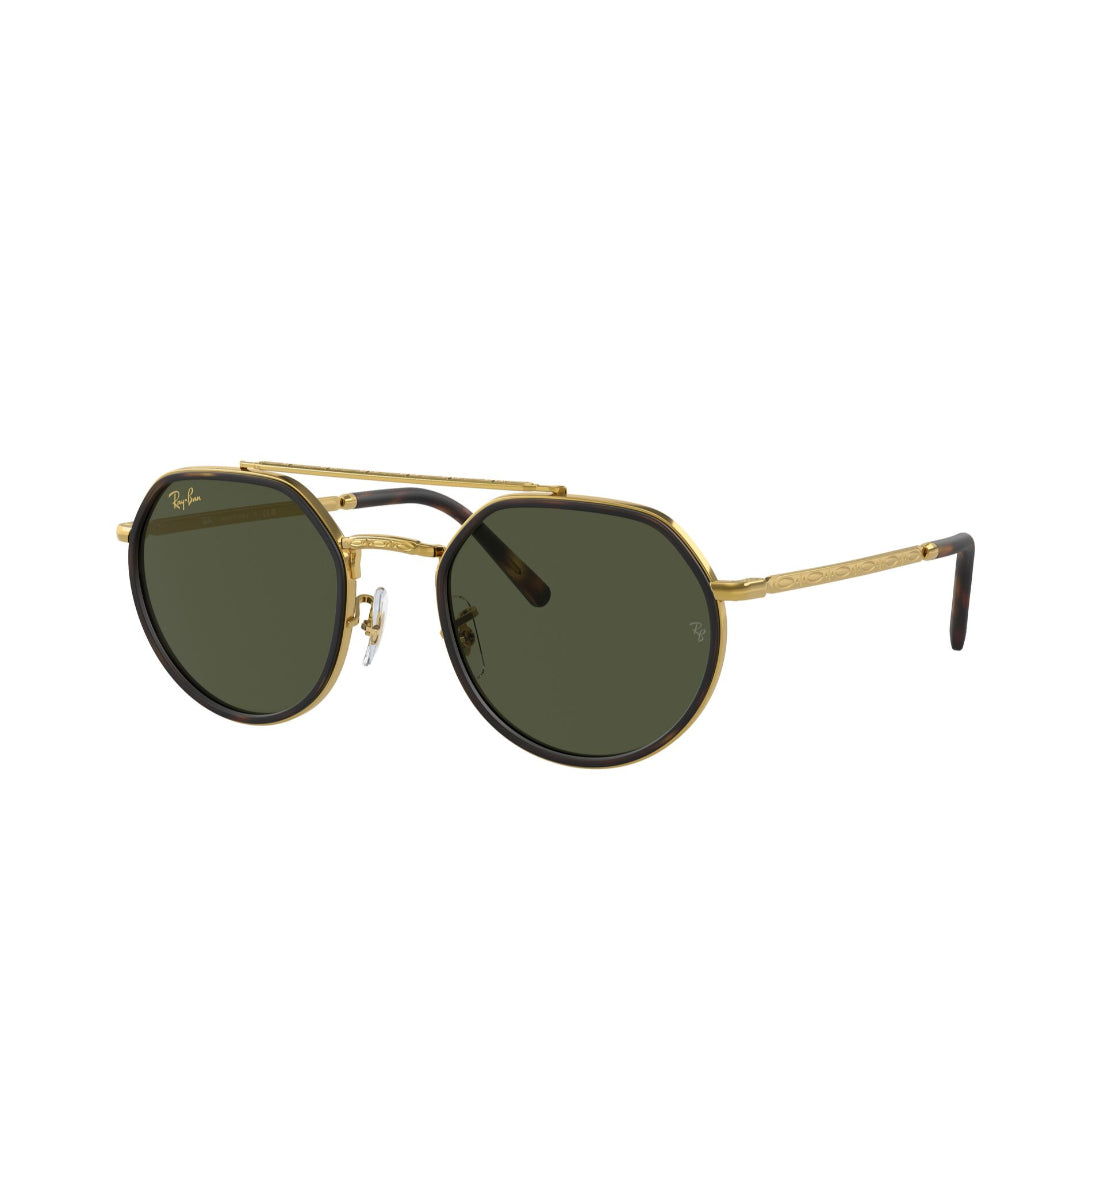 Legend Gold Ray-Ban